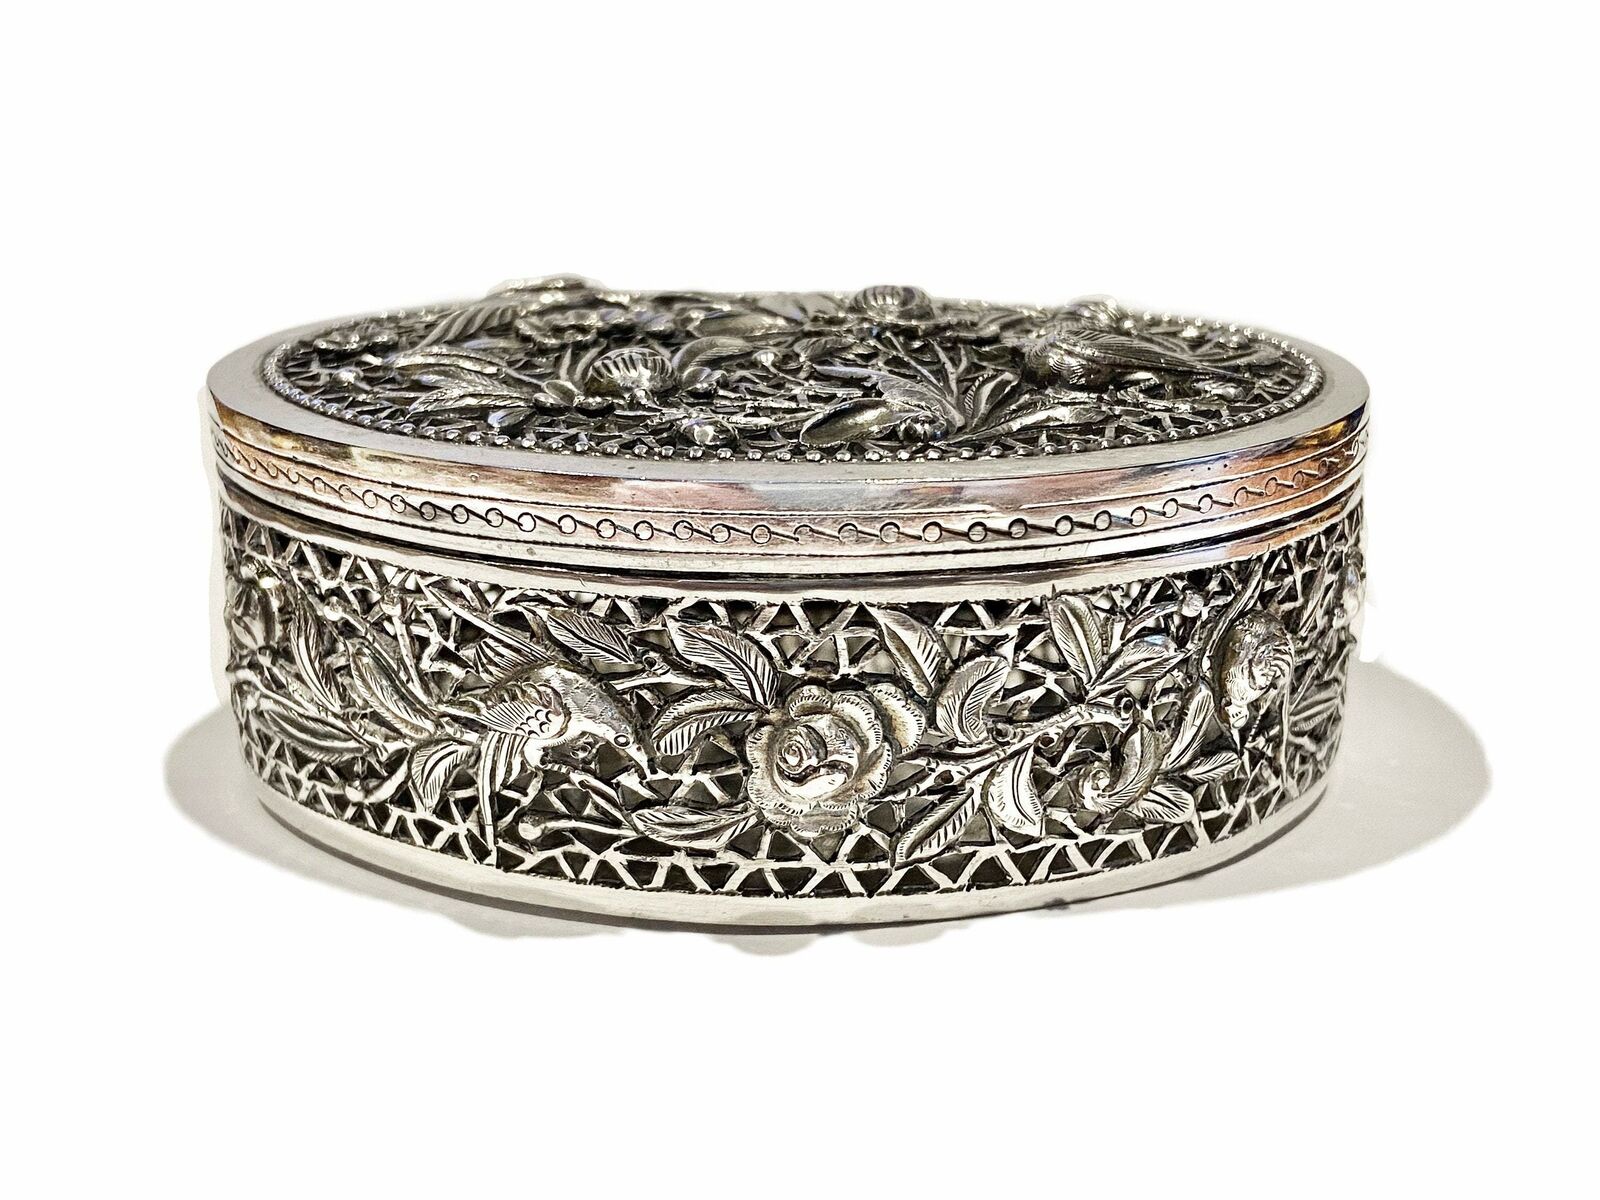 Antique Cambodian Silver Betel Box Khmer Birds And Flowers Trinket Box T90 Filig